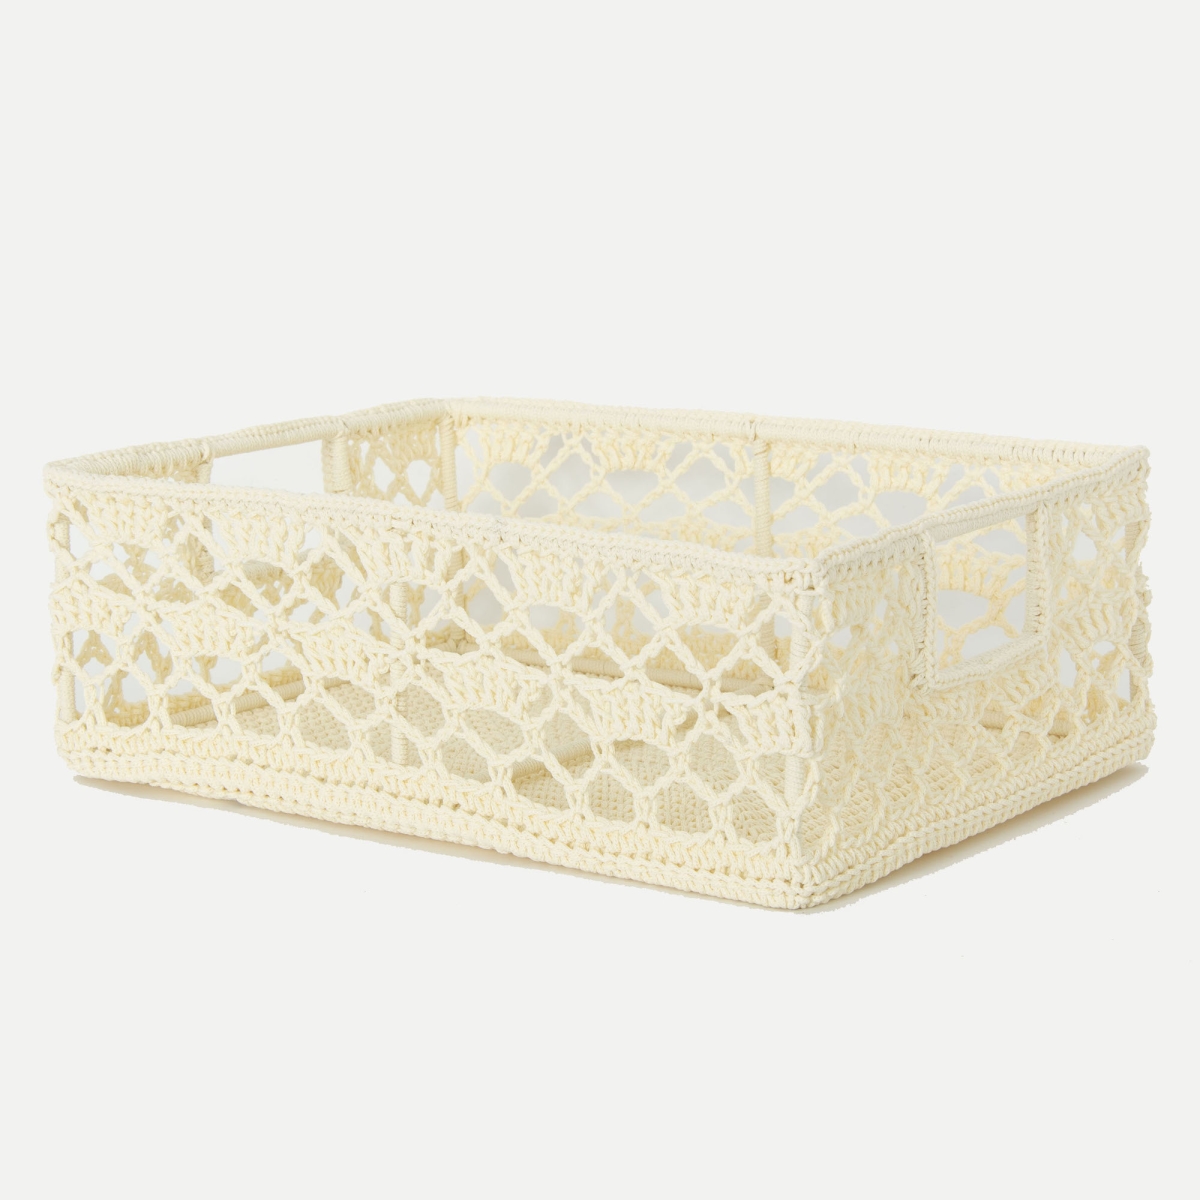 Picture of Heritage Lace MC-1120CR Mode Crochet Basket, Cream - 12 x 9 x 5 in.